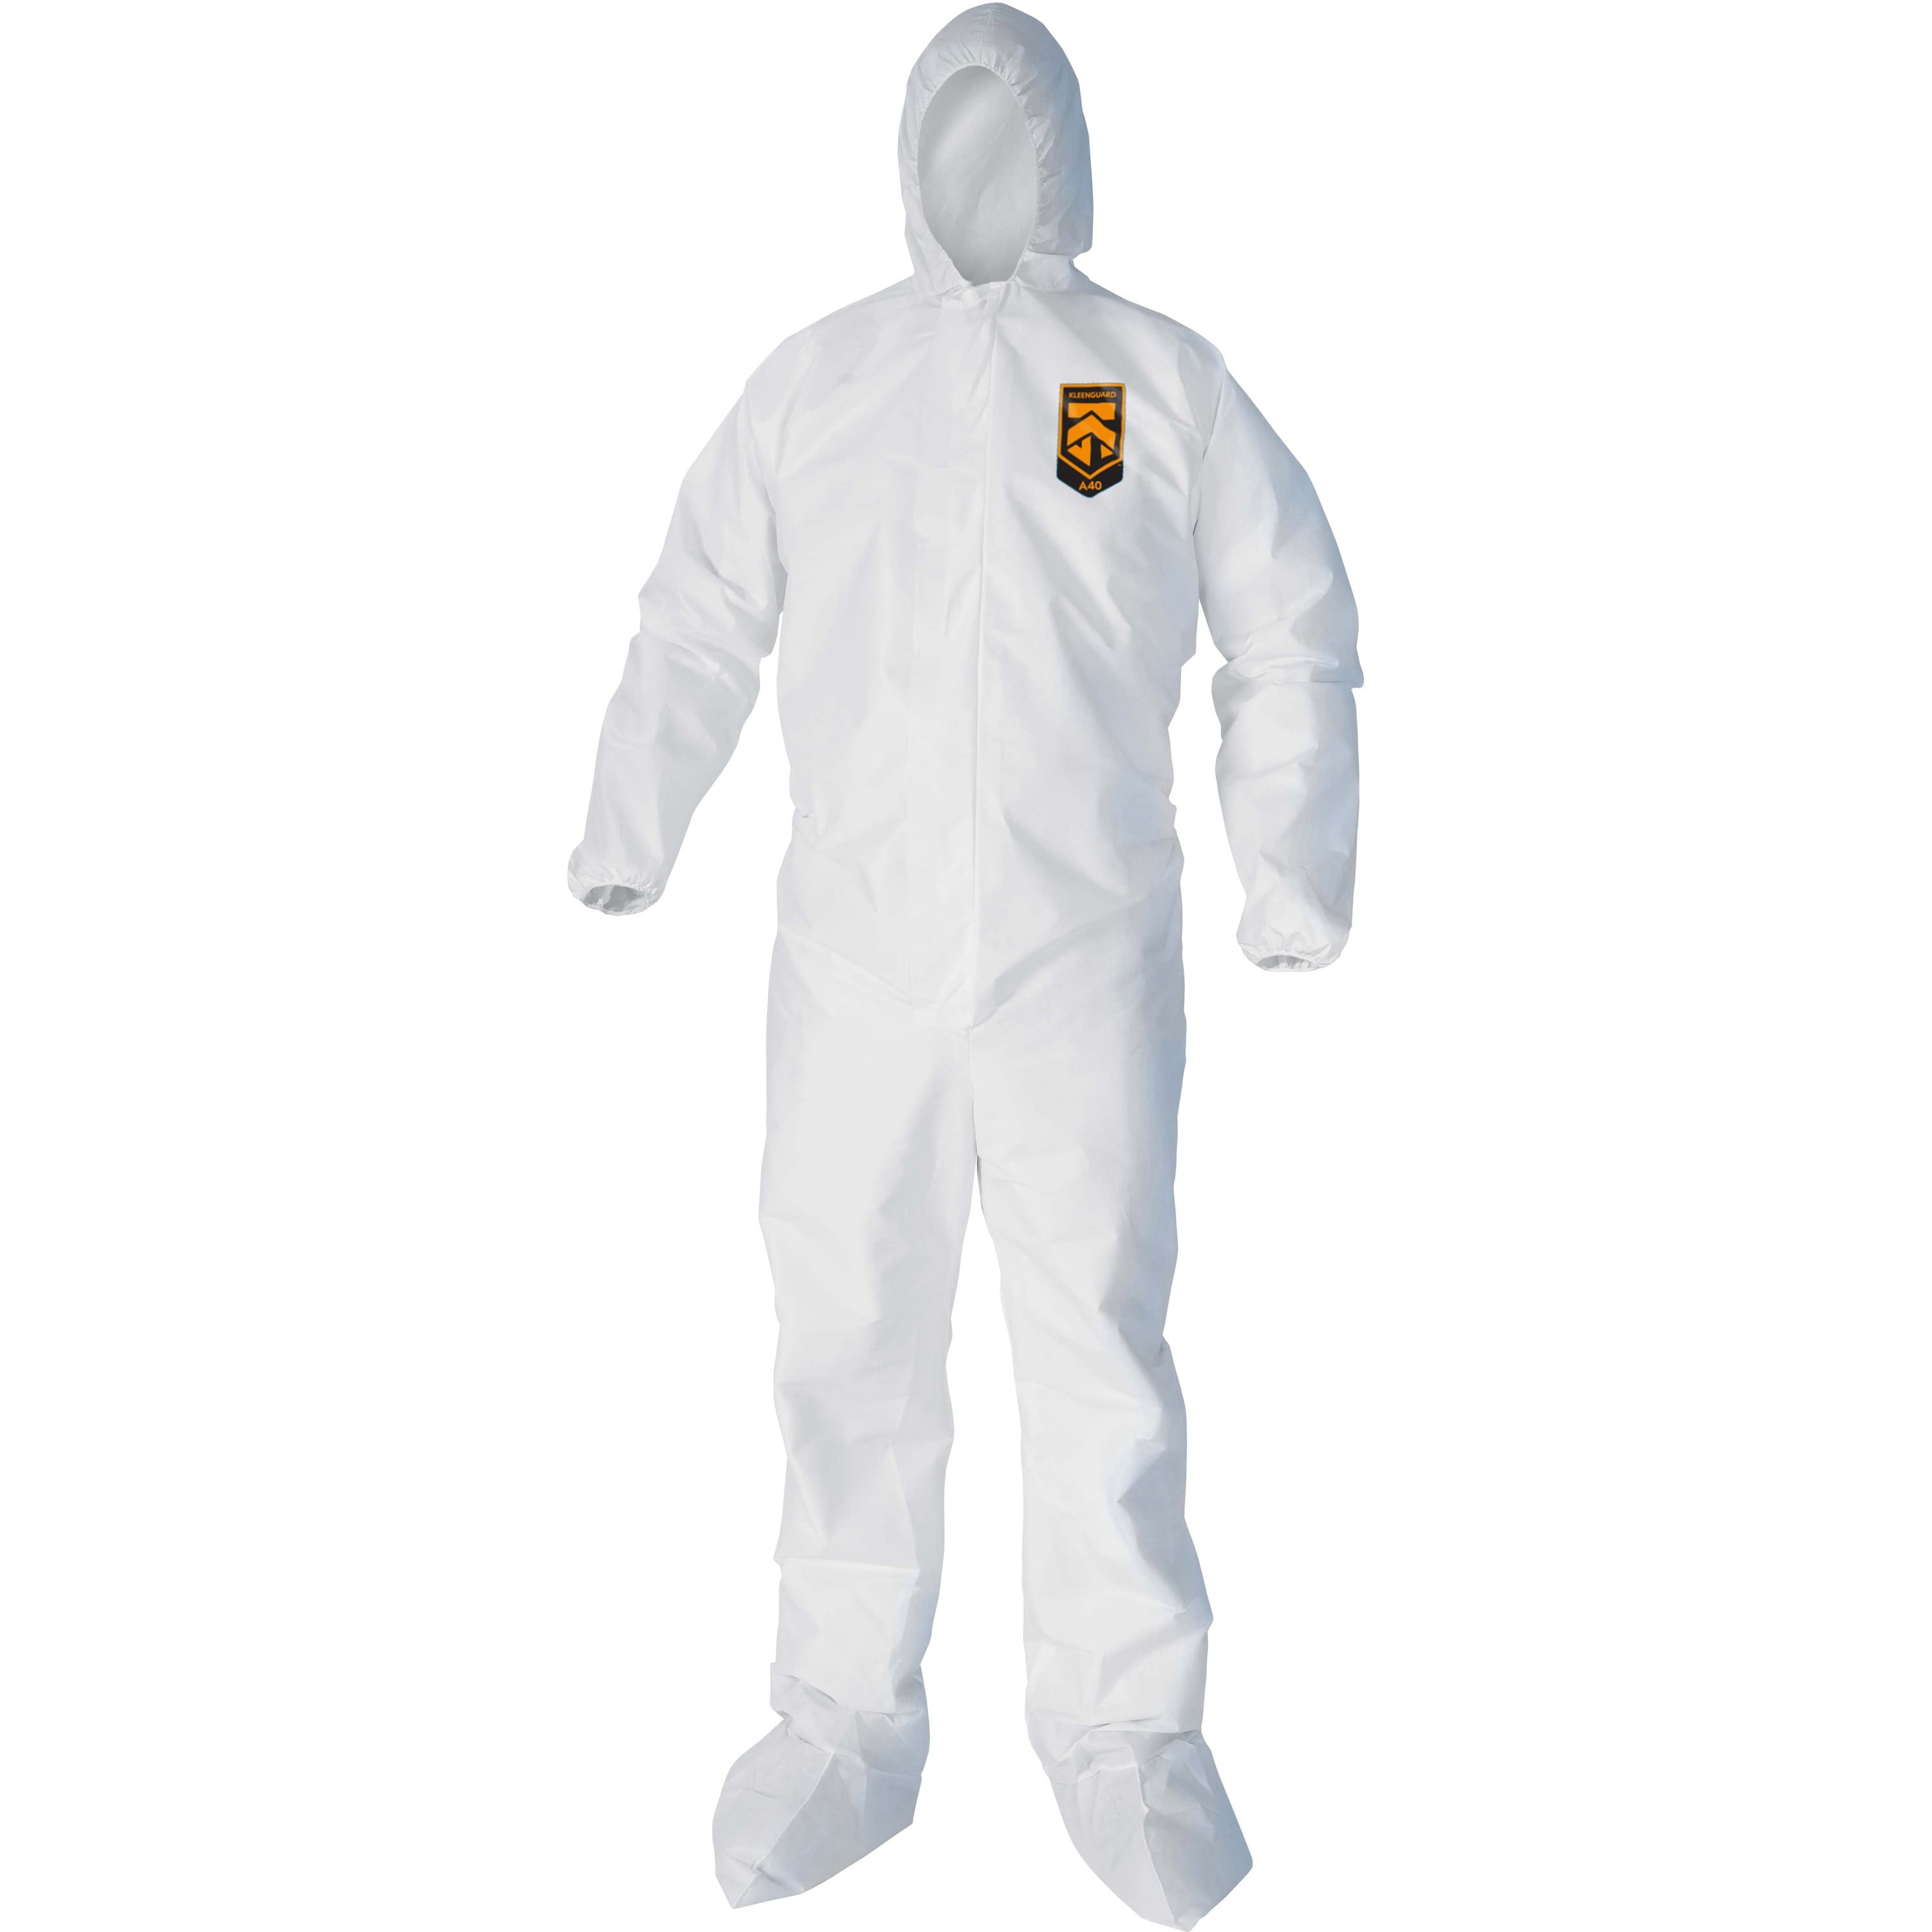 Dupont Tyvek 400 PPE BUNNY SUIT Coveralls with Hood New Size M Price/Per Box. 